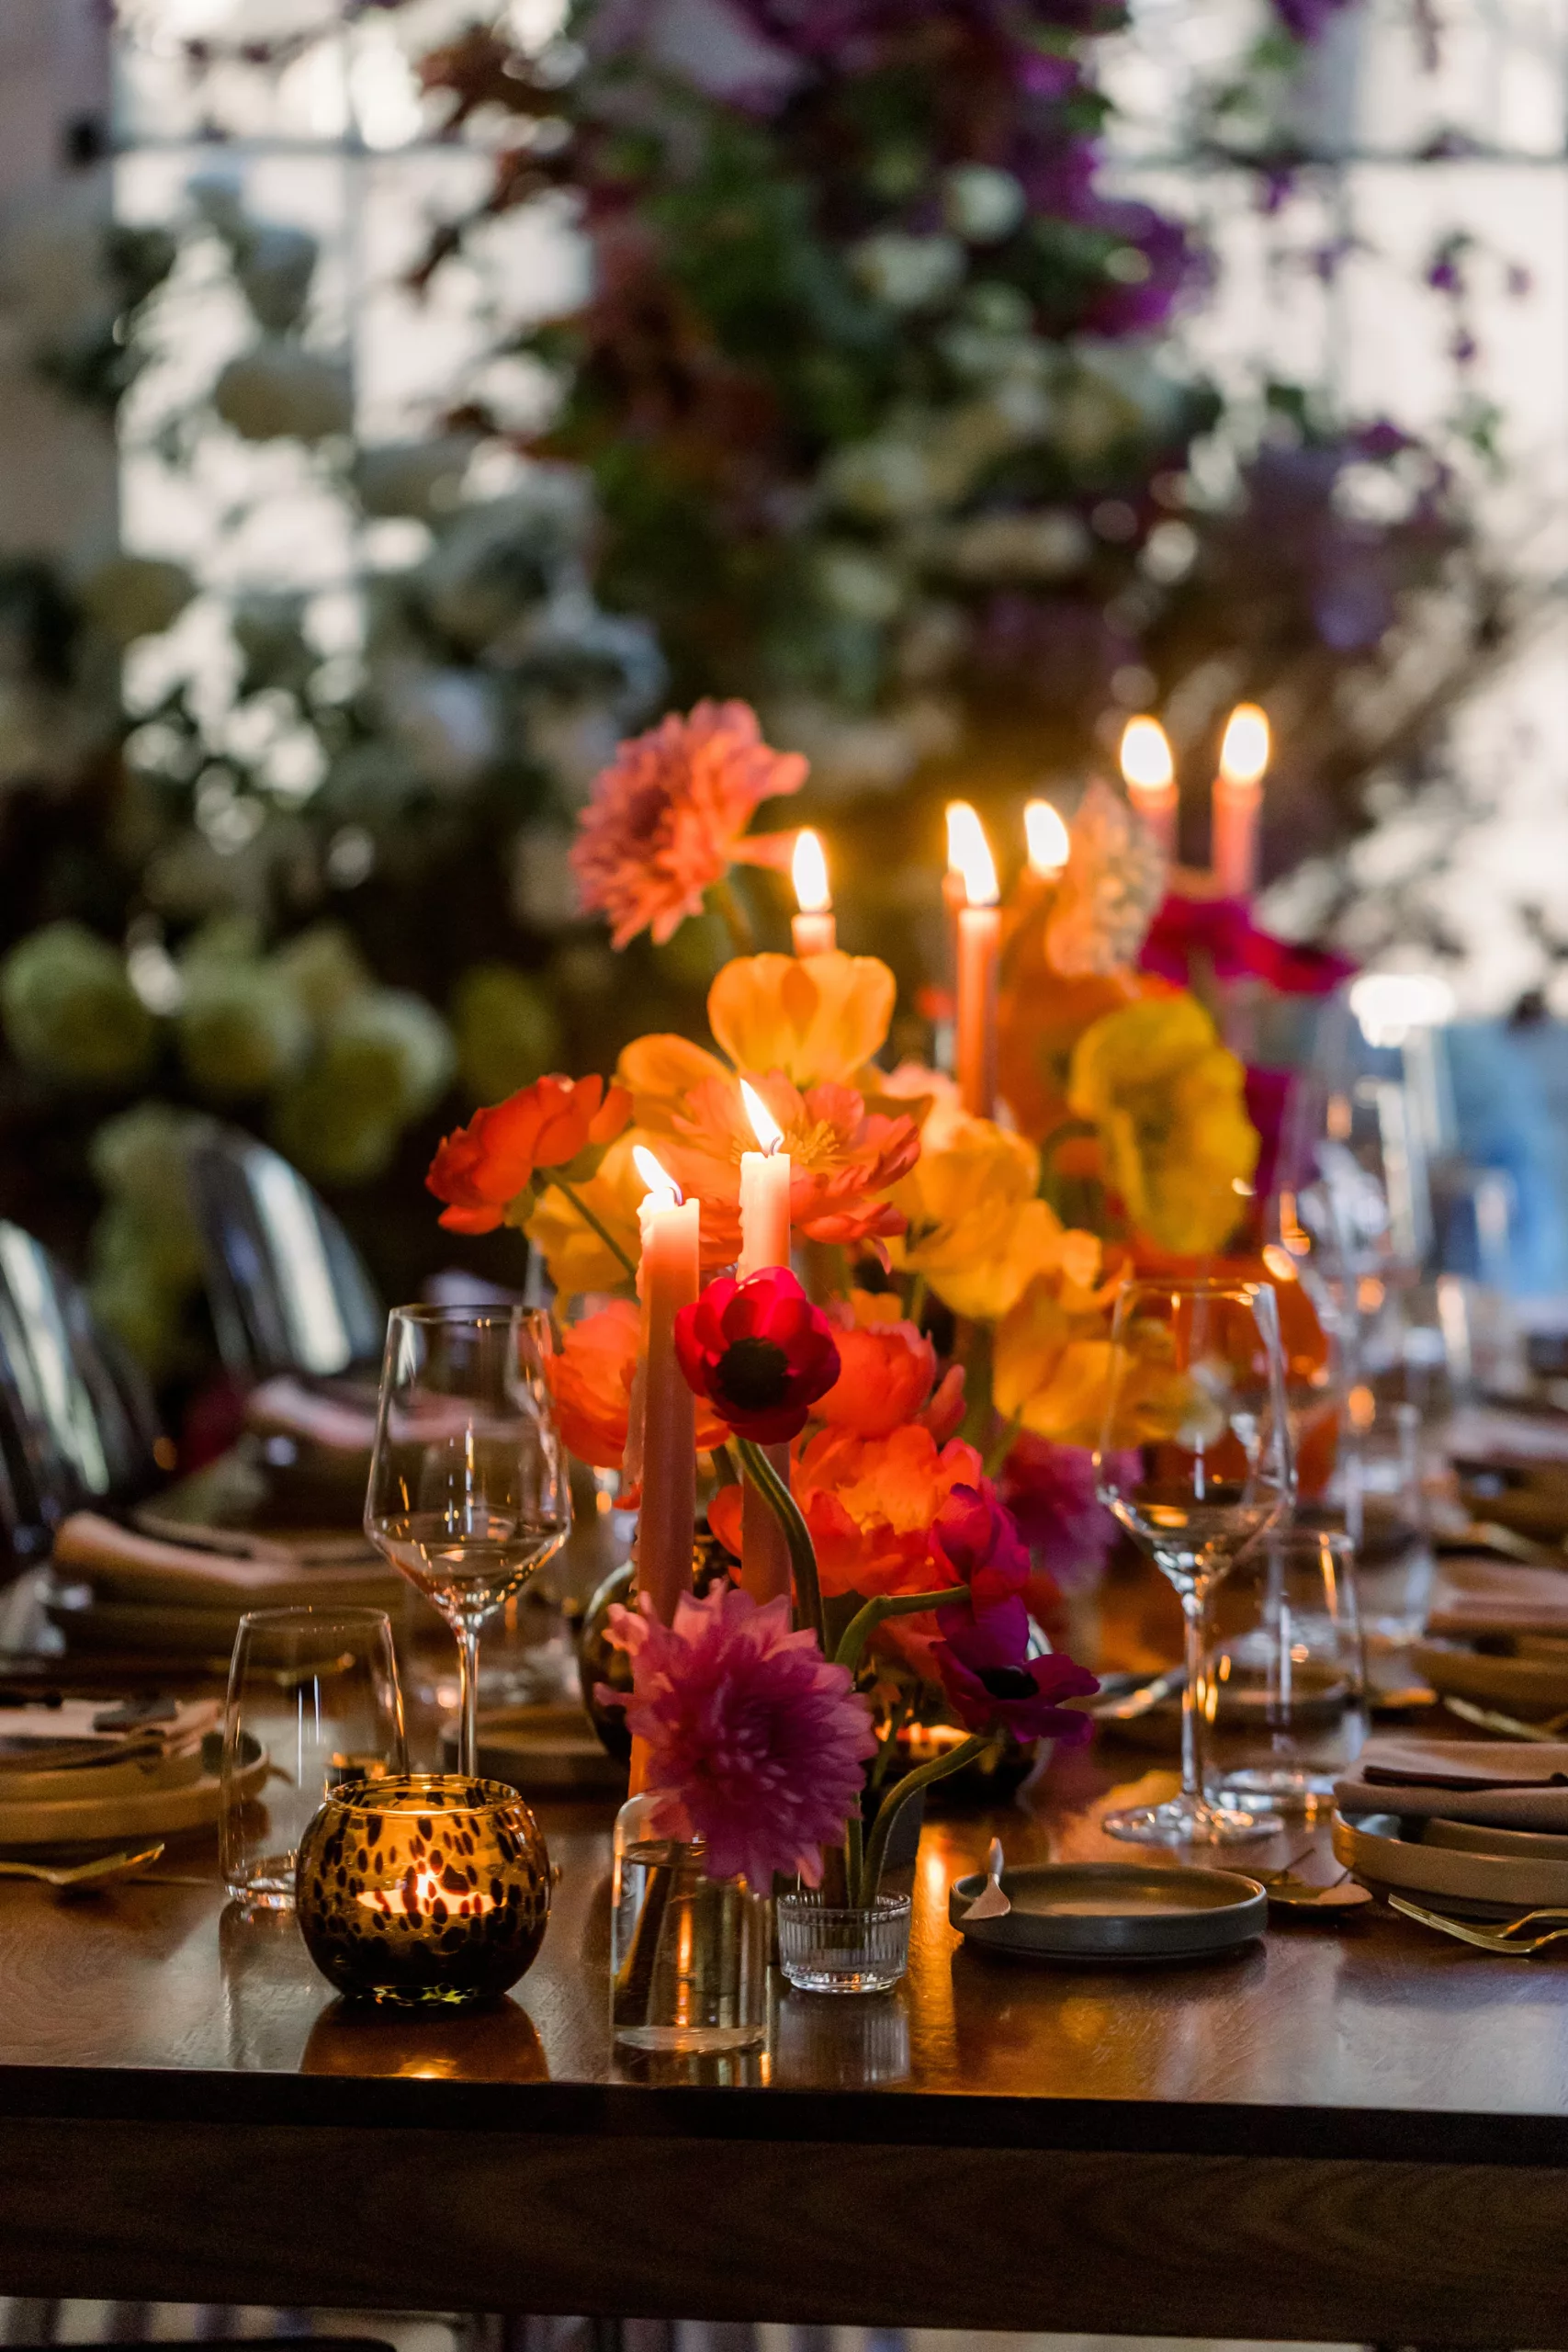 Details of a wedding ceremony table setting with lit candles and colorful flowers